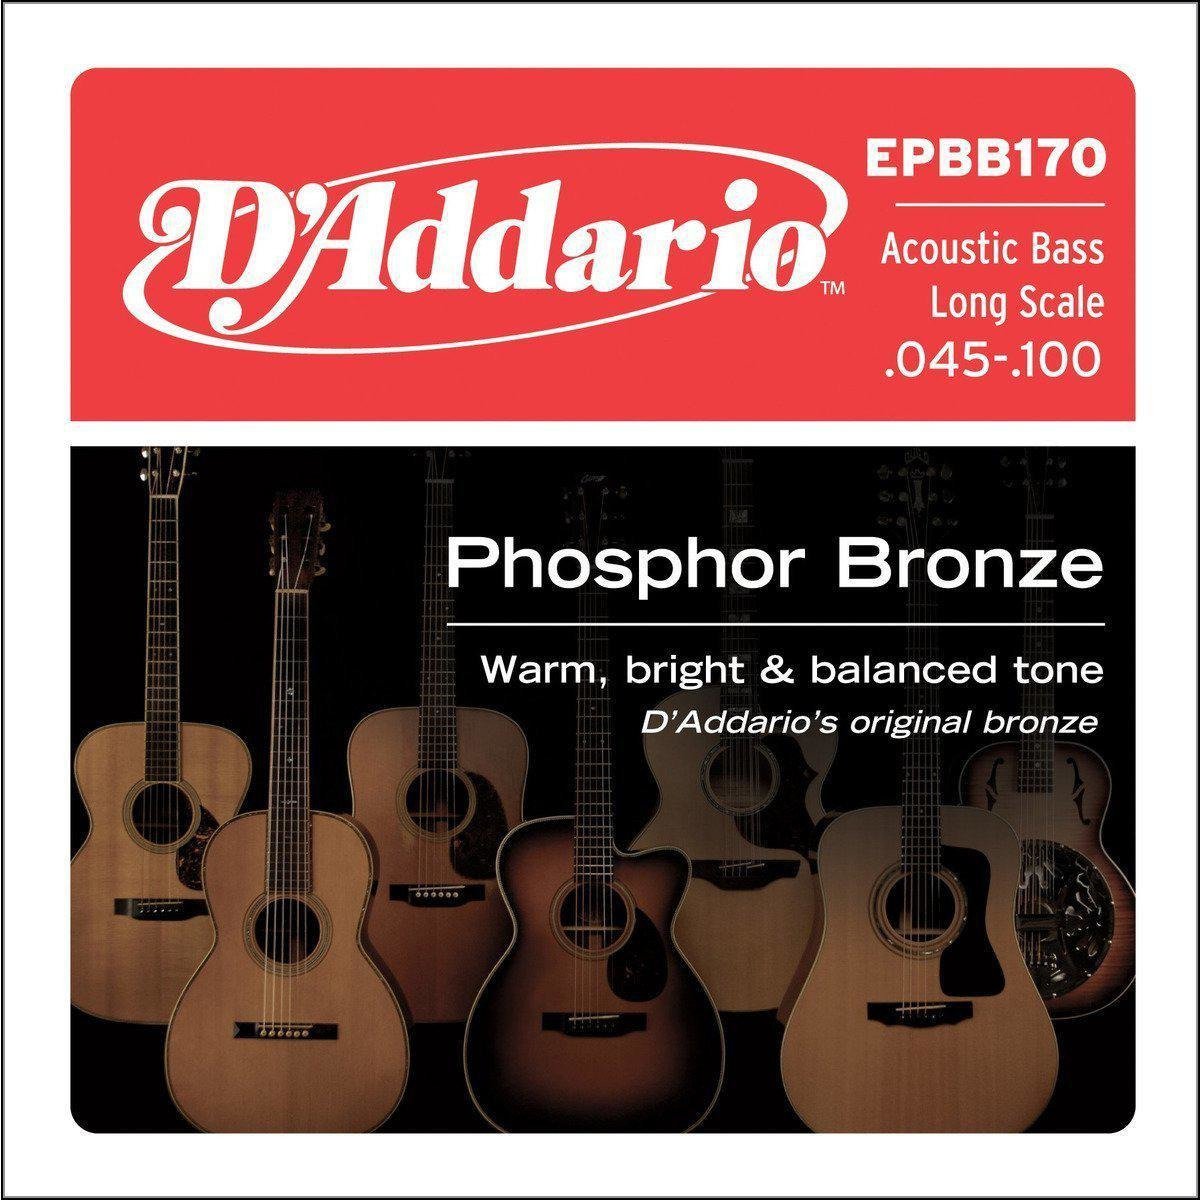 D'Addario EPBB170 Phosphor Bronze Acoustic Bass, Long Scale, 45-100-Andy's Music